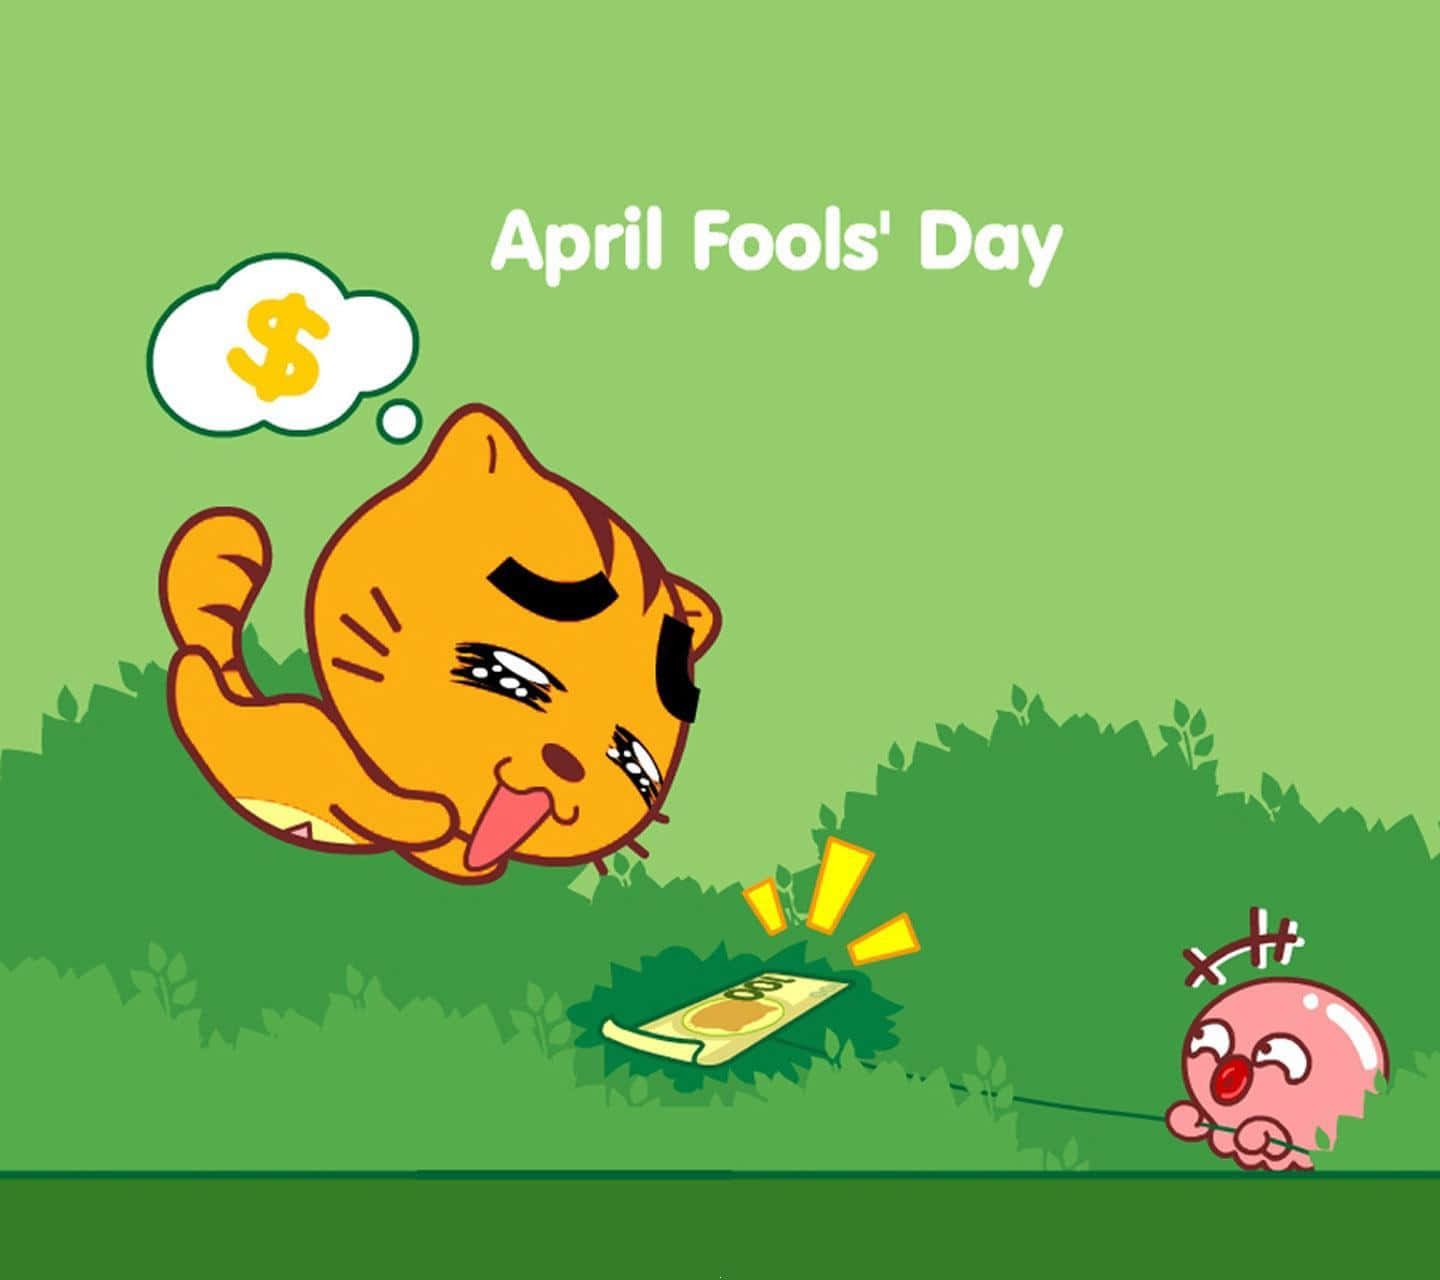 Cheers to a Happy April Fools’!